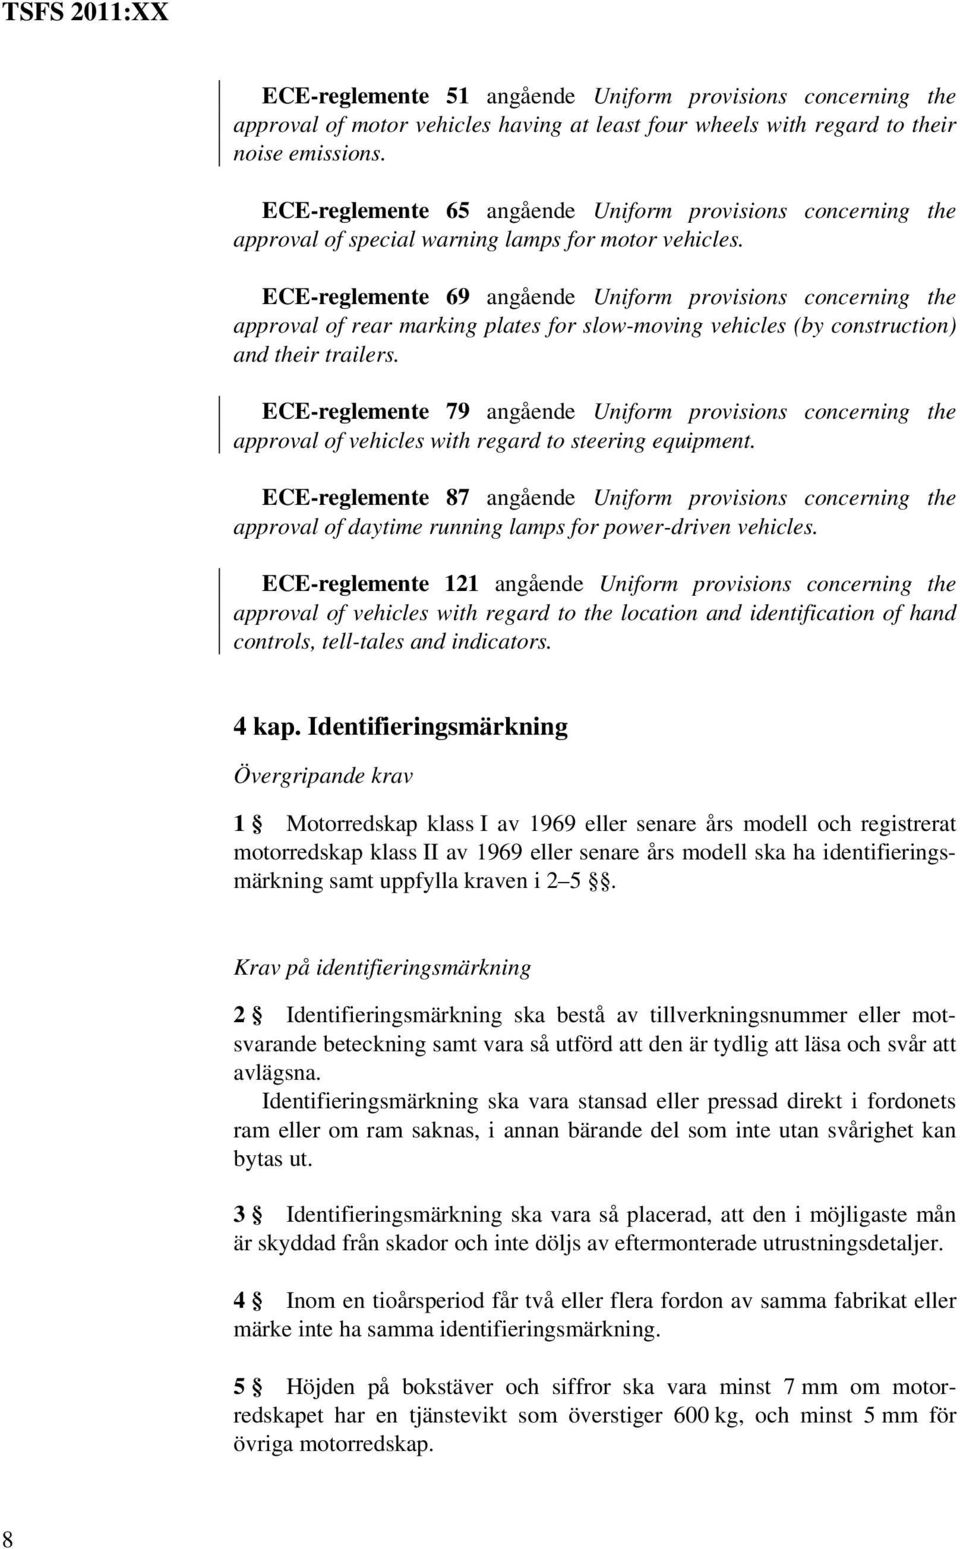 ECE-reglemente 69 angående Uniform provisions concerning the approval of rear marking plates for slow-moving vehicles (by construction) and their trailers.